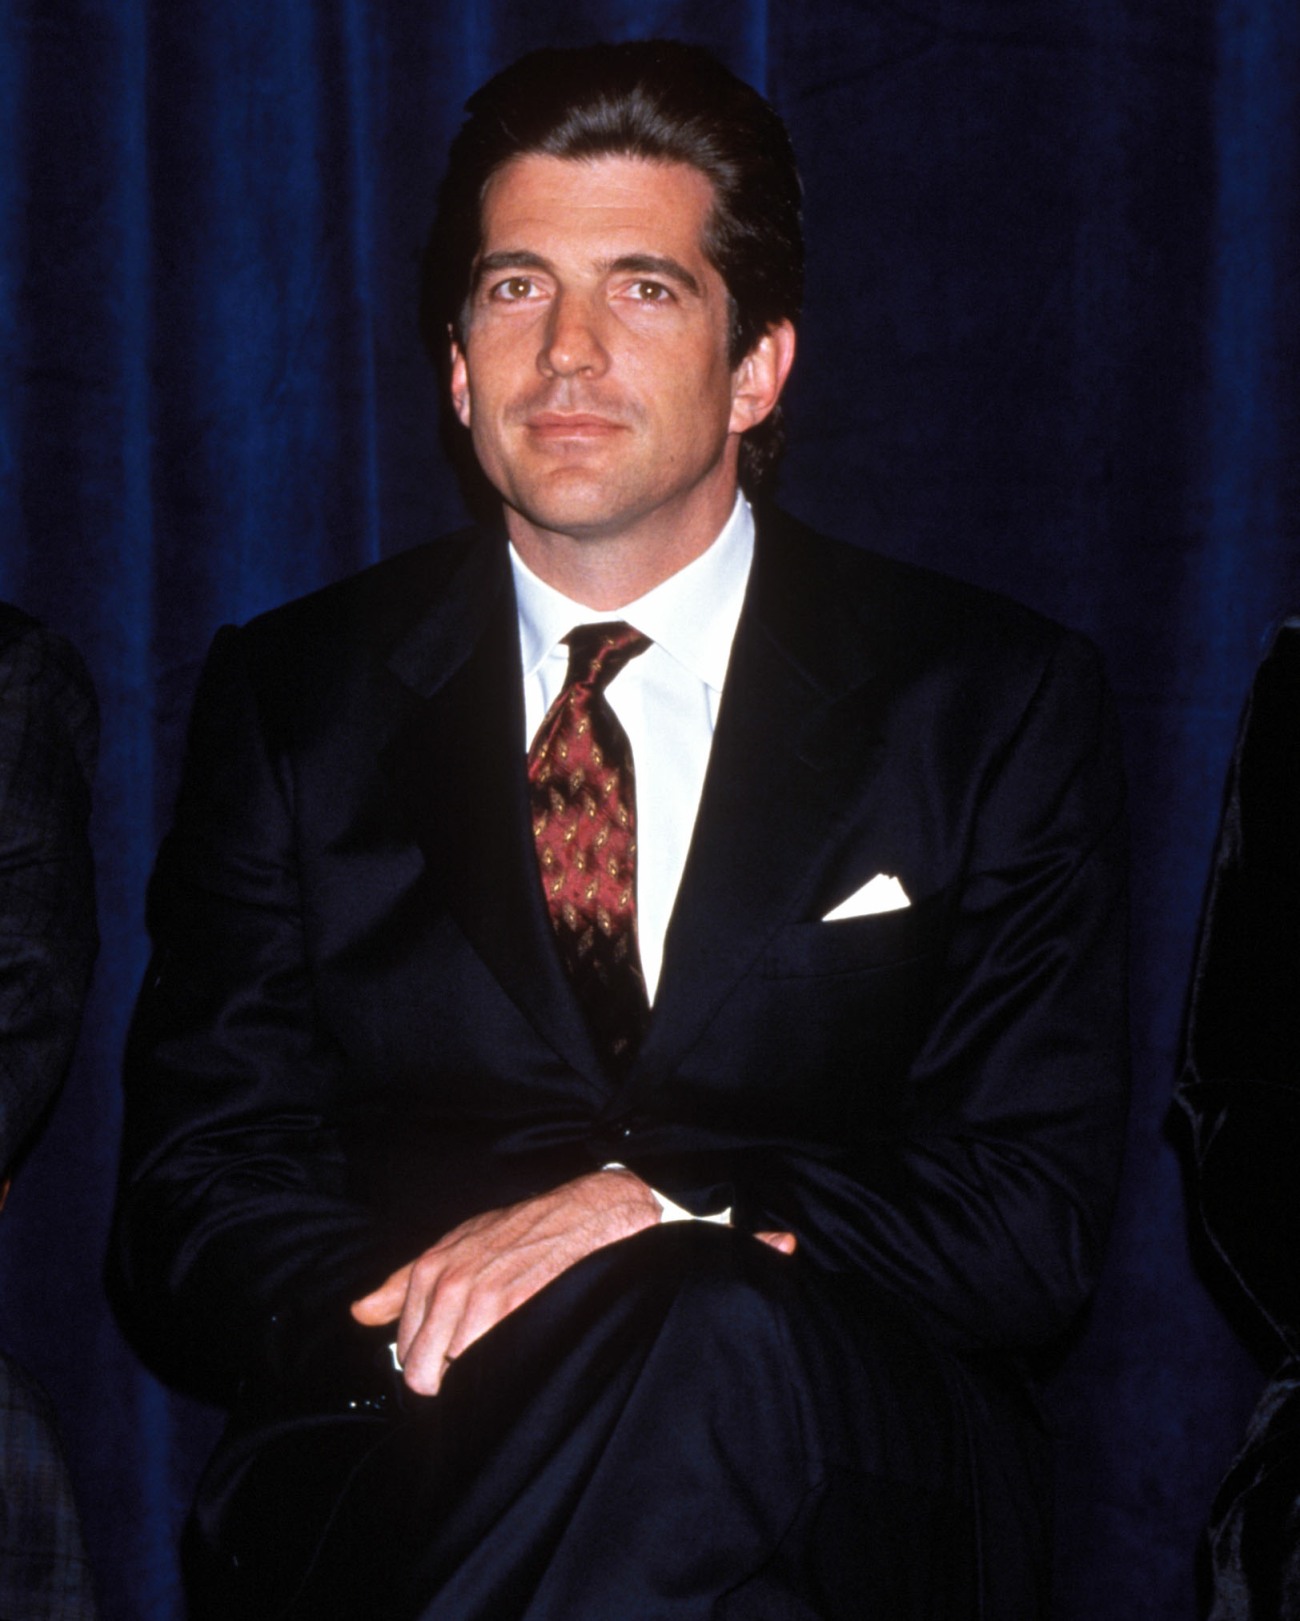 JOHN F KENNEDY JR ARCHIVE IMAGES